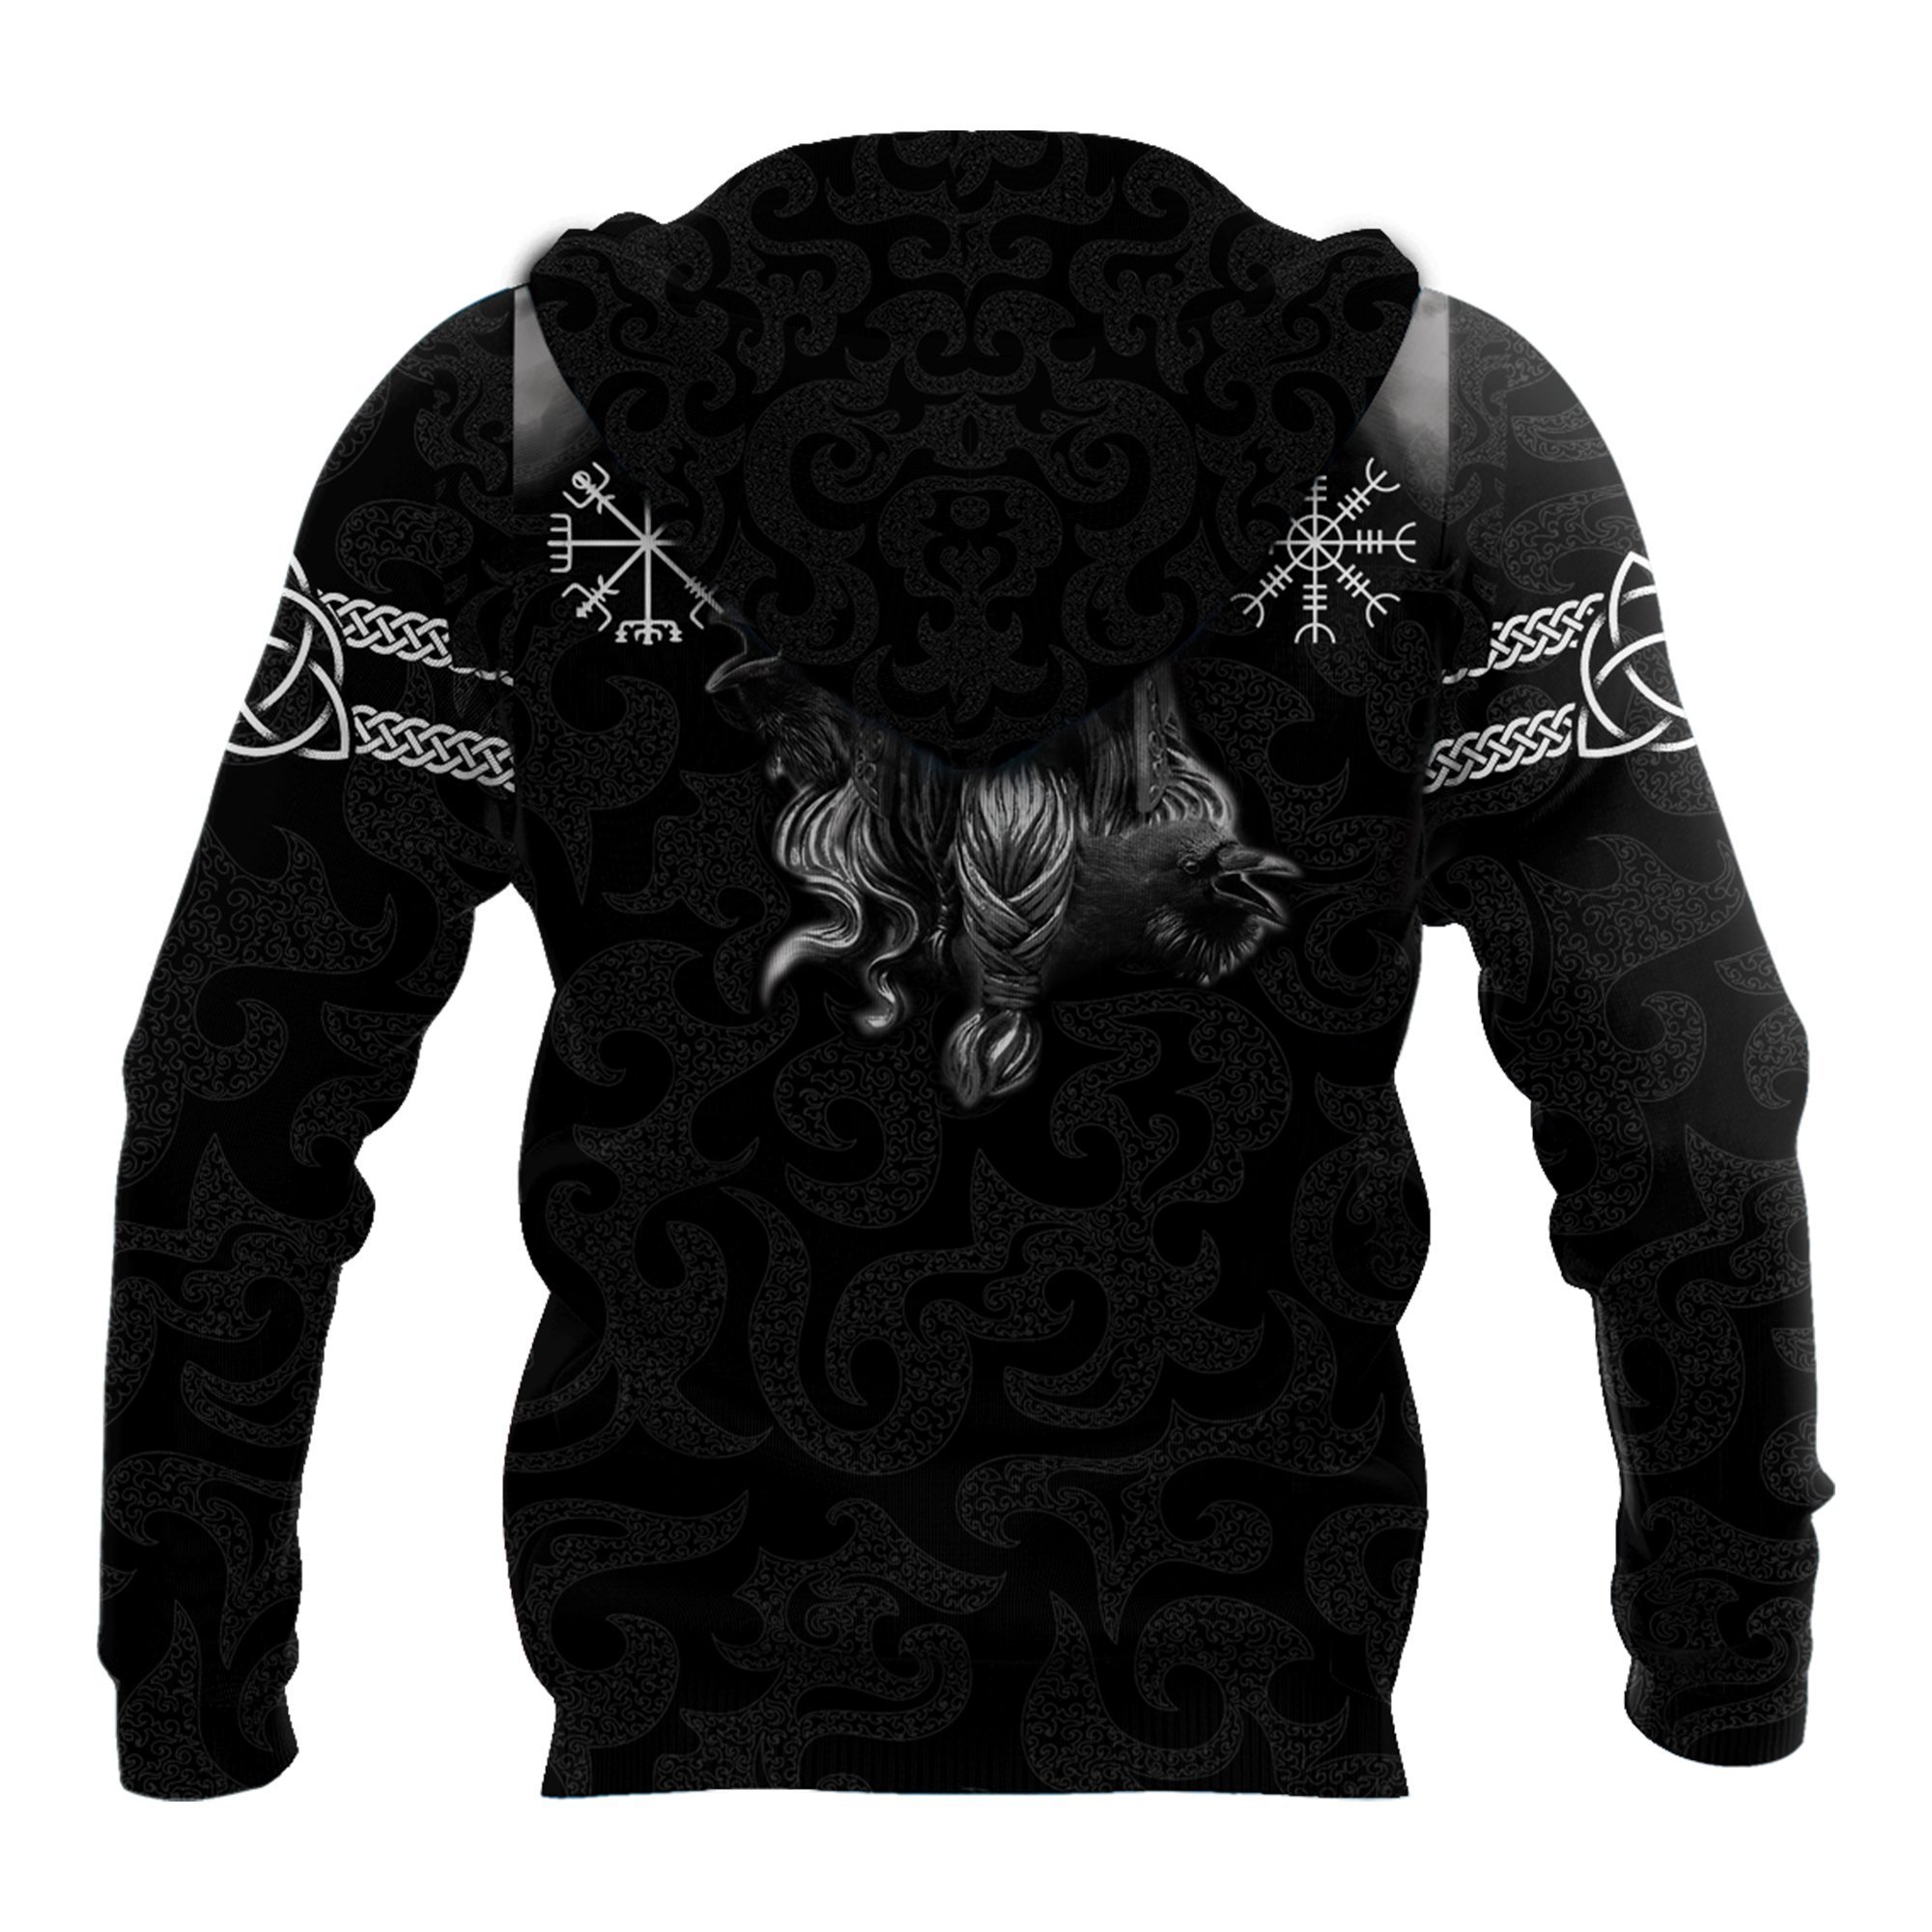 Hammer of thor forever we are one viking full printing hoodie - back